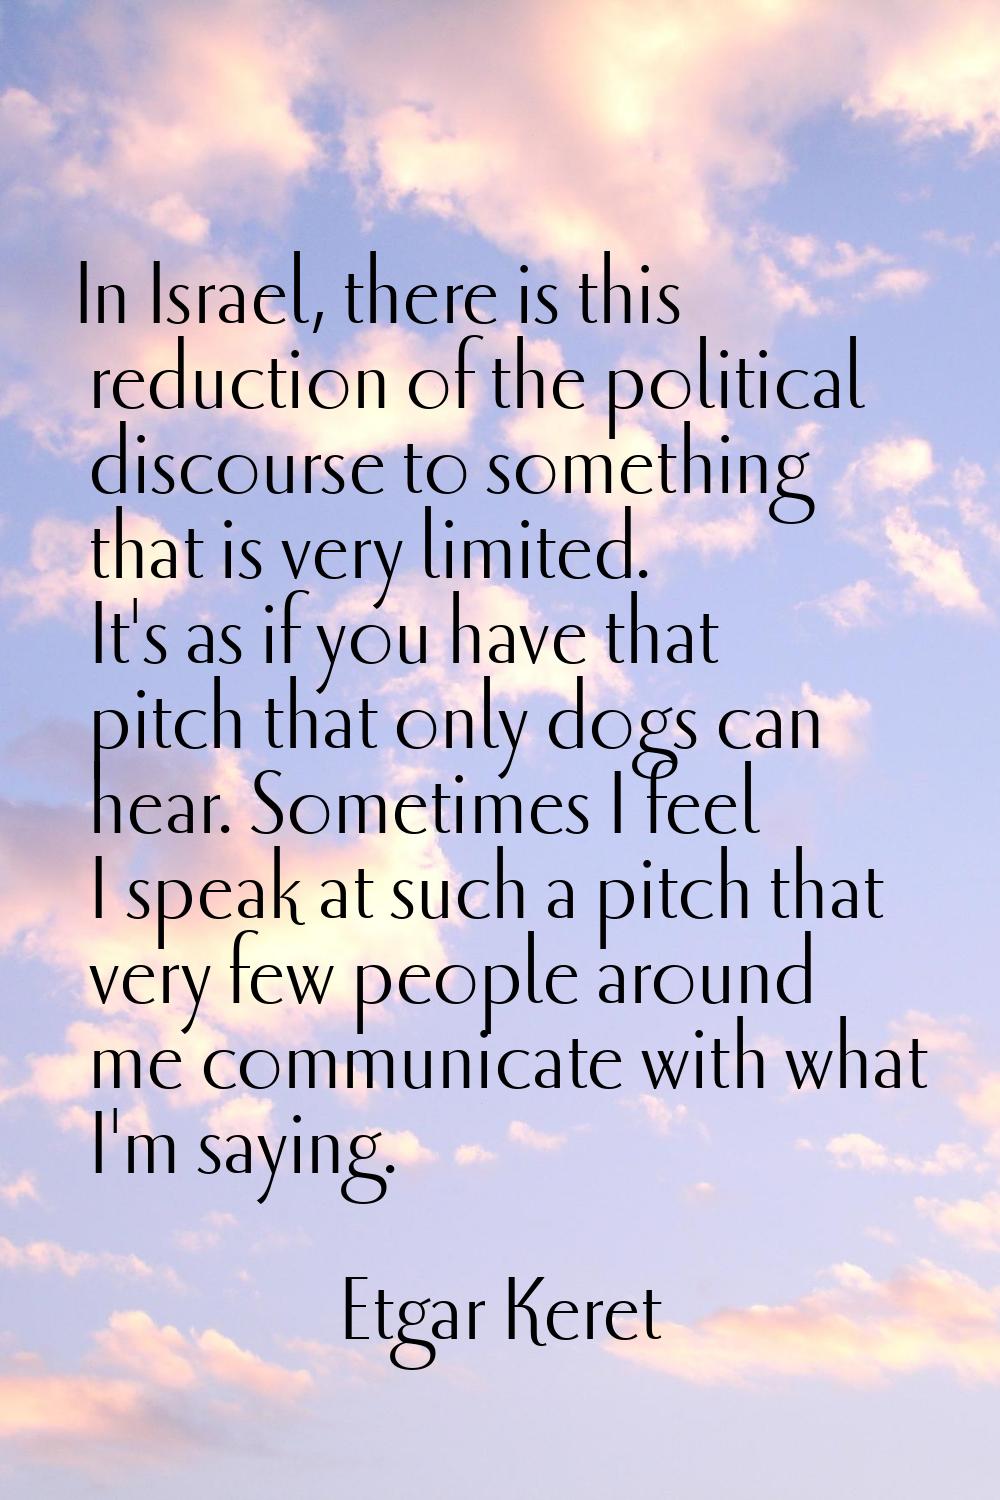 In Israel, there is this reduction of the political discourse to something that is very limited. It